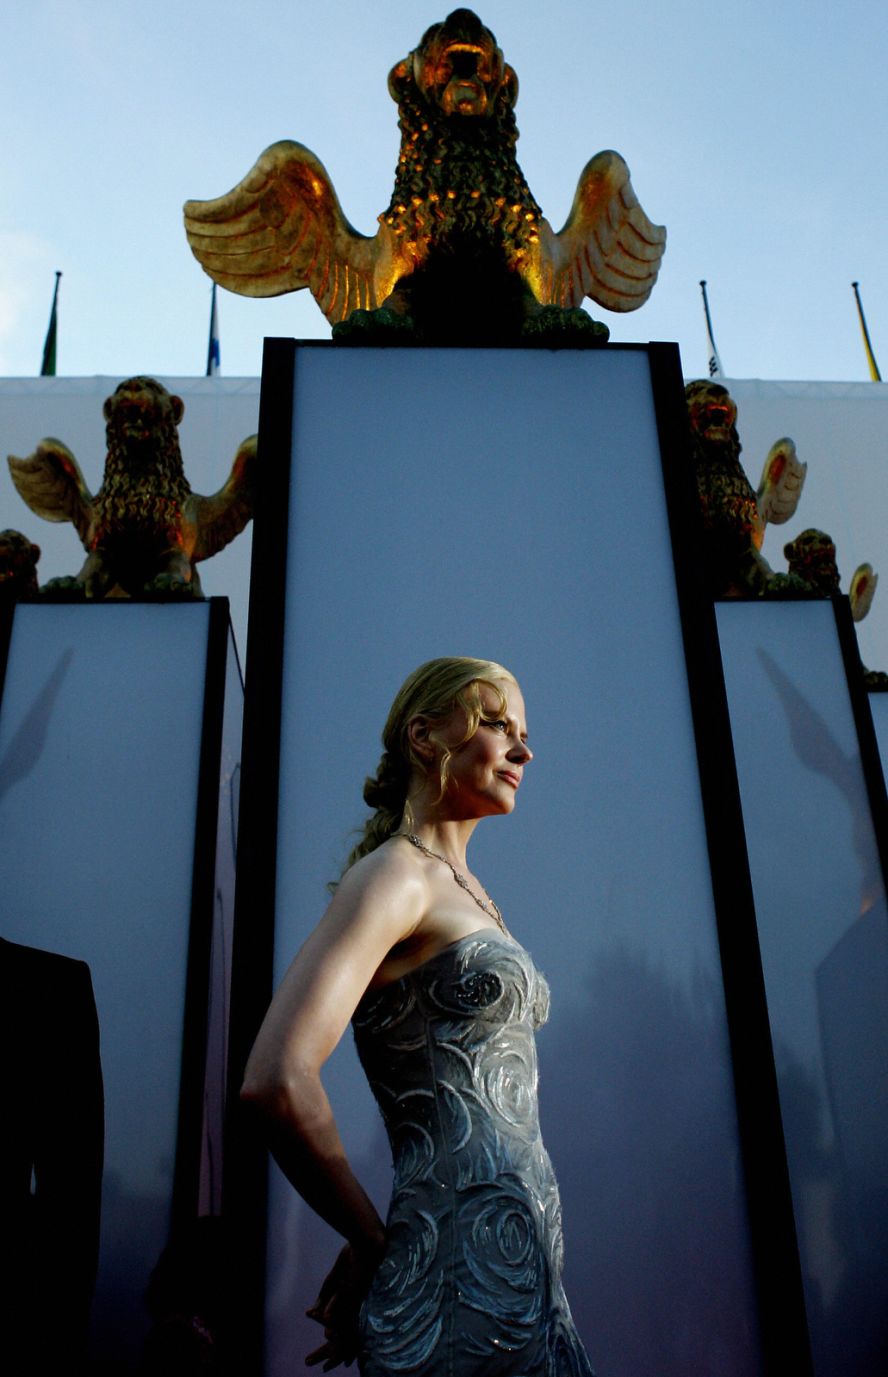 Kidman arrives for the premiere of the film "Birth" in Venice, Italy, in 2004.